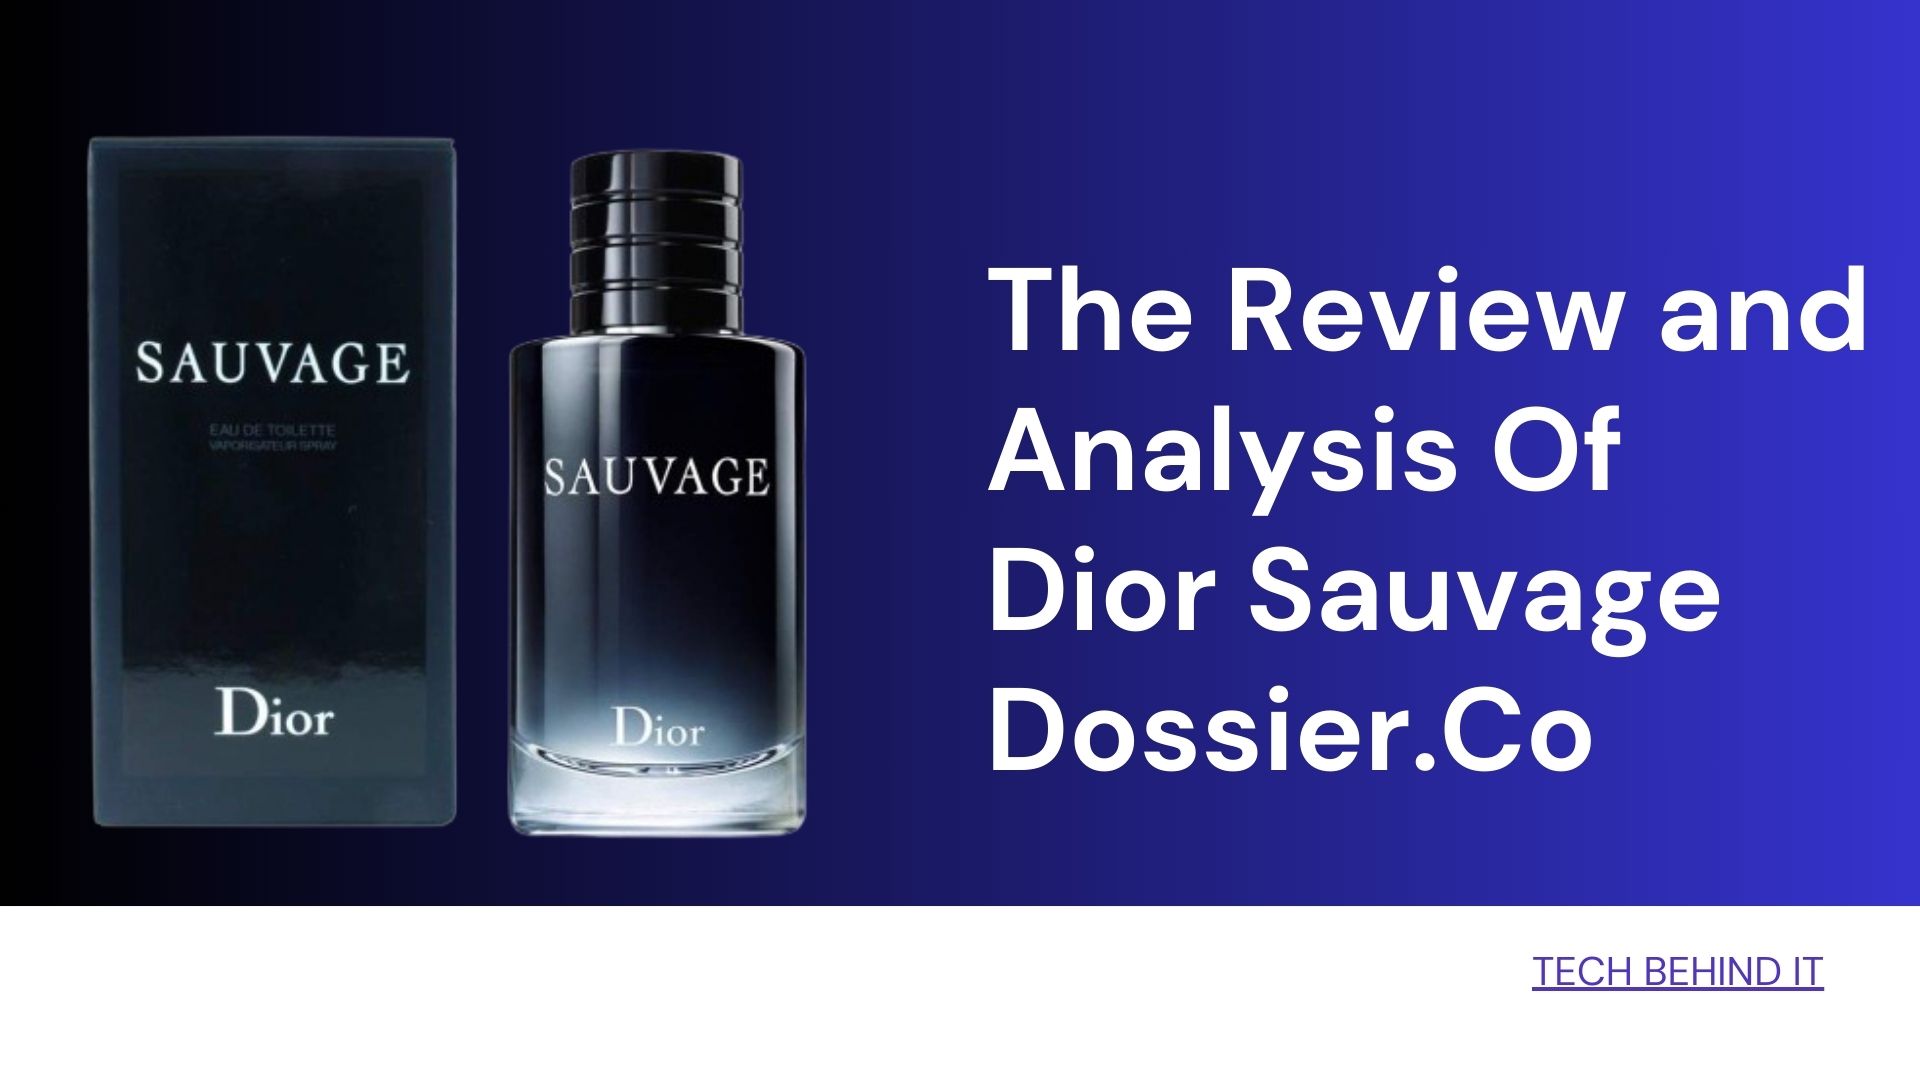 The Review and Analysis Of Dior Sauvage Dossier.Co 